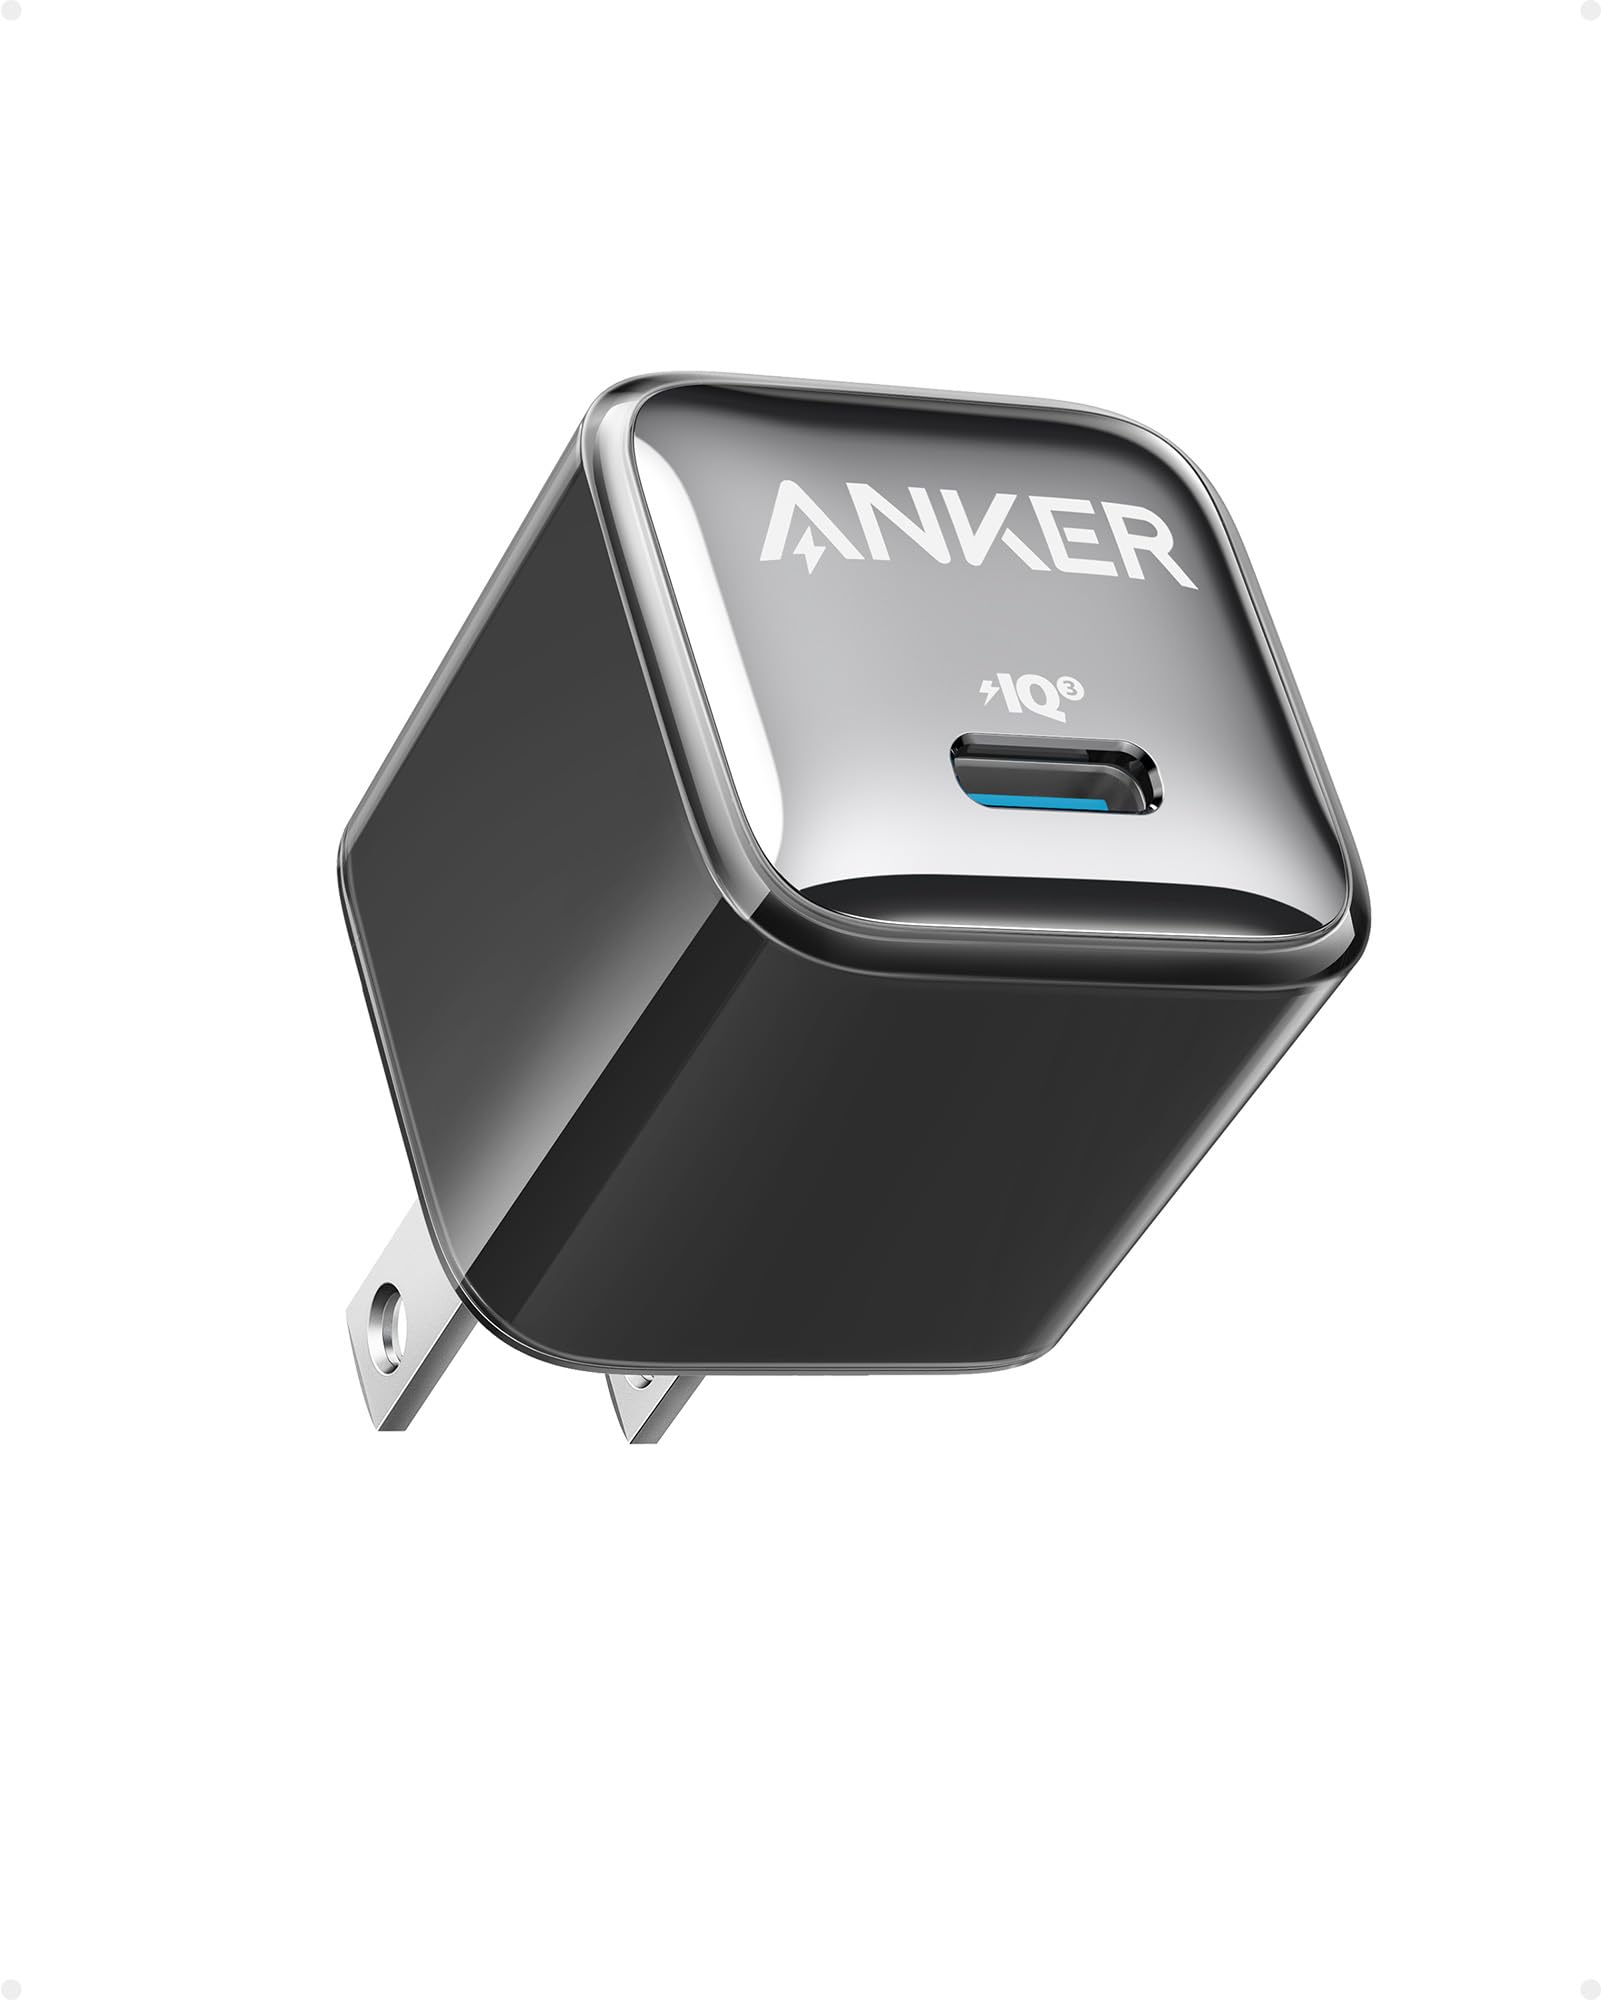 Anker USB C Charger Cable & USB C Charger Block 20W